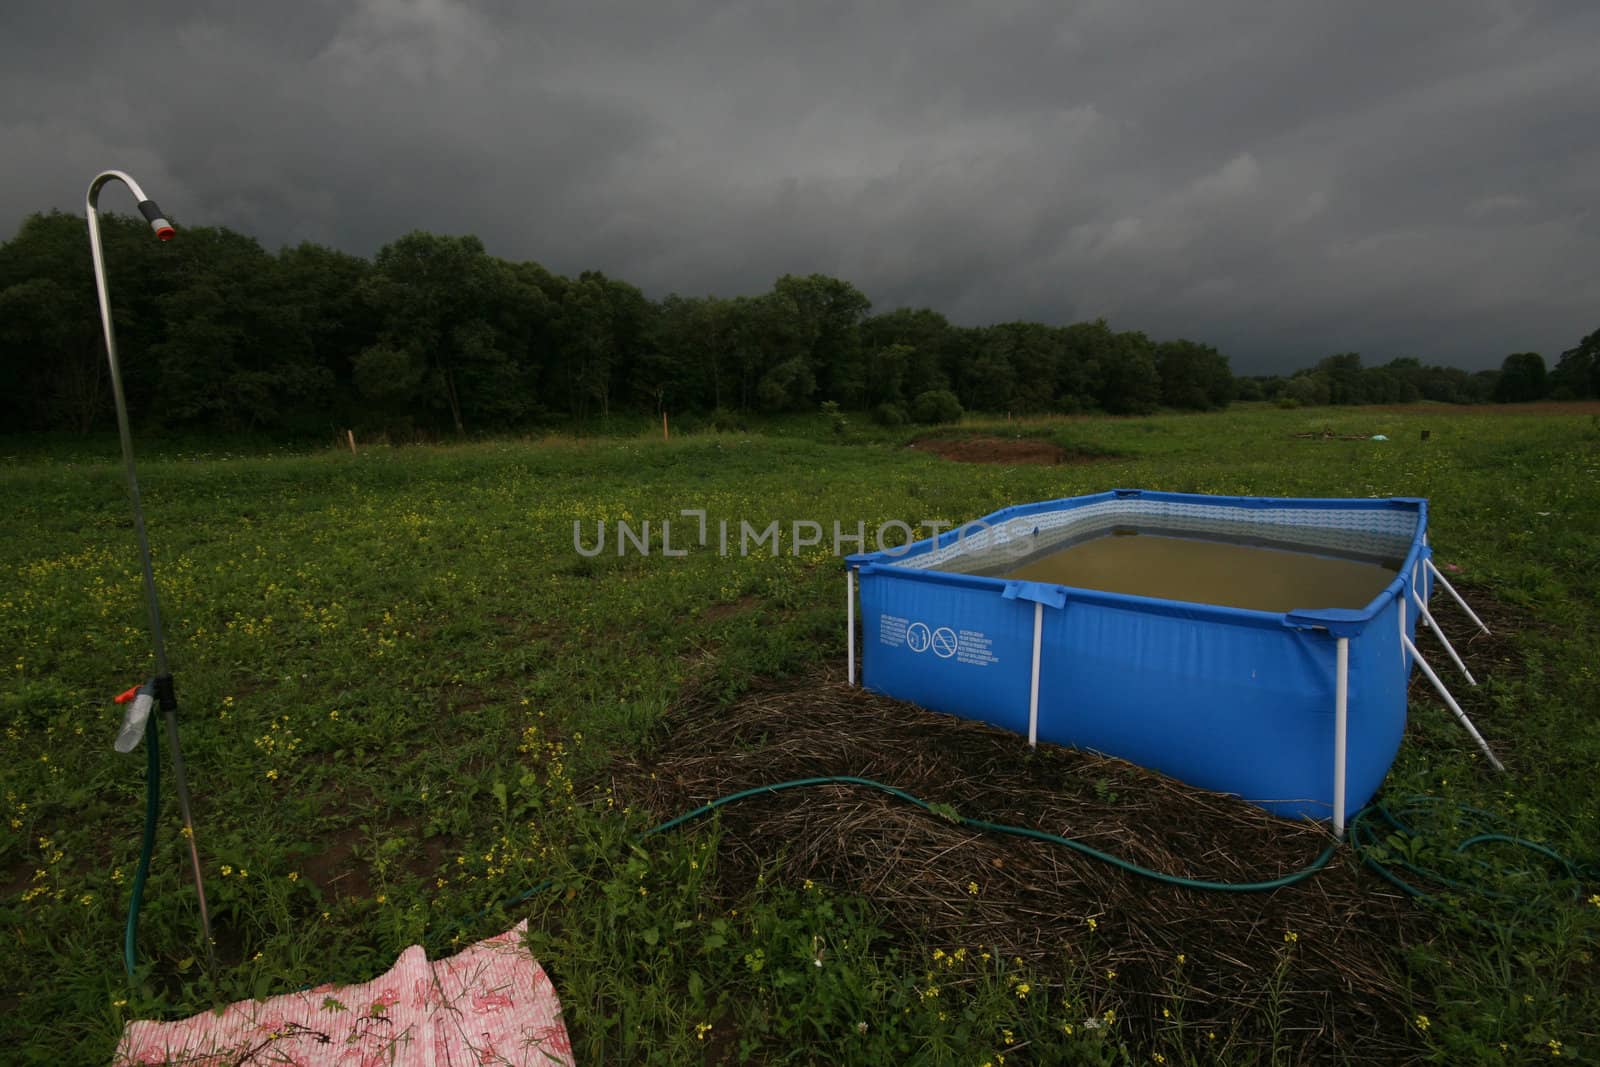 Swimming pool in the meadow at thunderstorm.